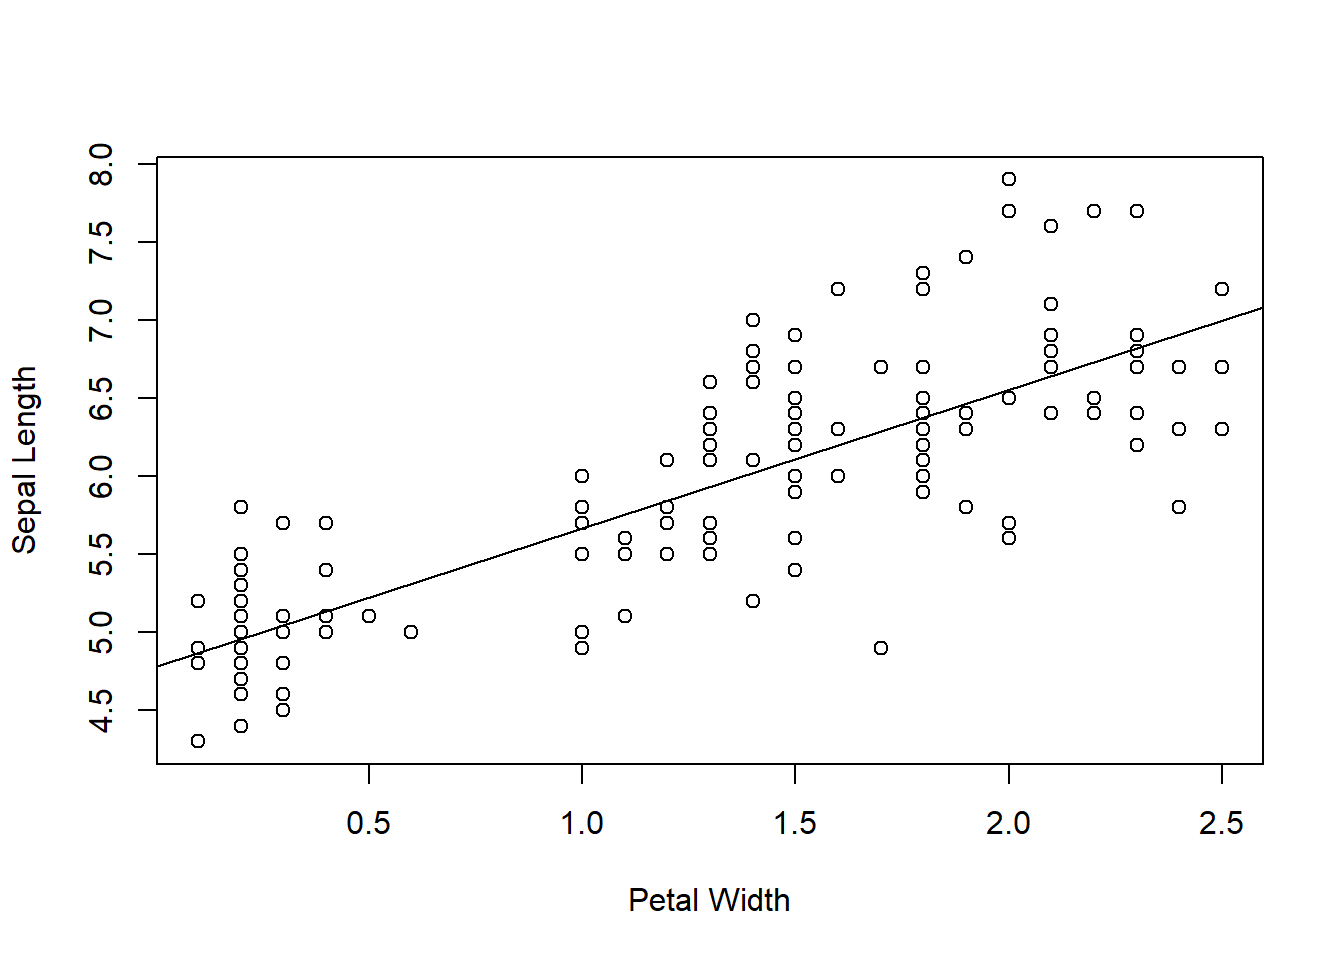 A scatterplot of Sepal Length vs Petal Width for each observation with an upward trending line superimposed